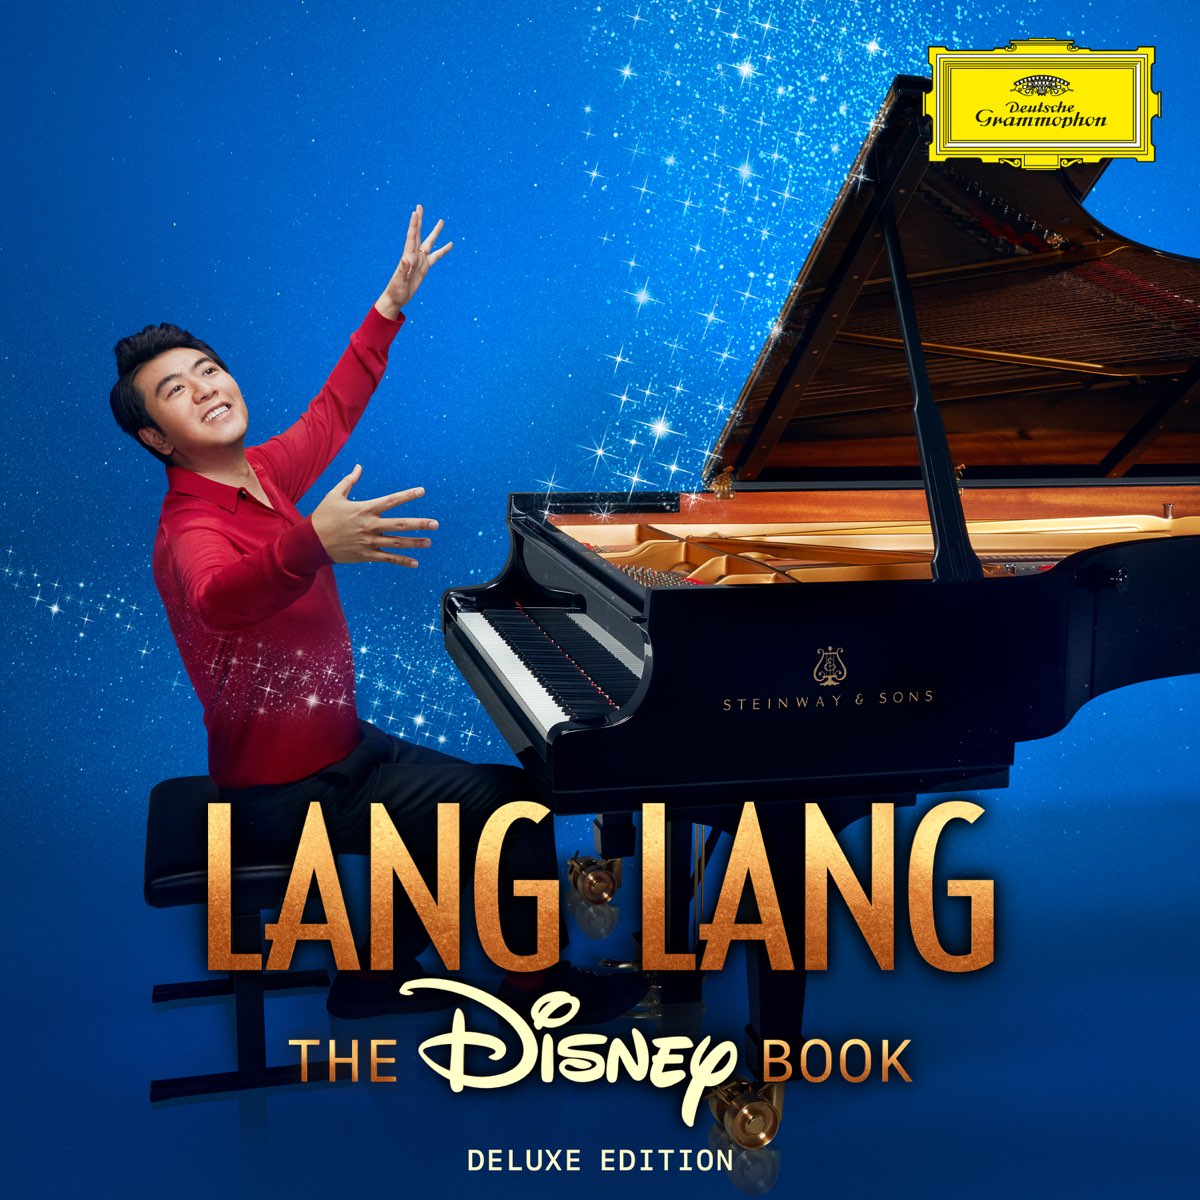 ‎The Disney Book (Deluxe Edition) - Album by Lang Lang - Apple Music